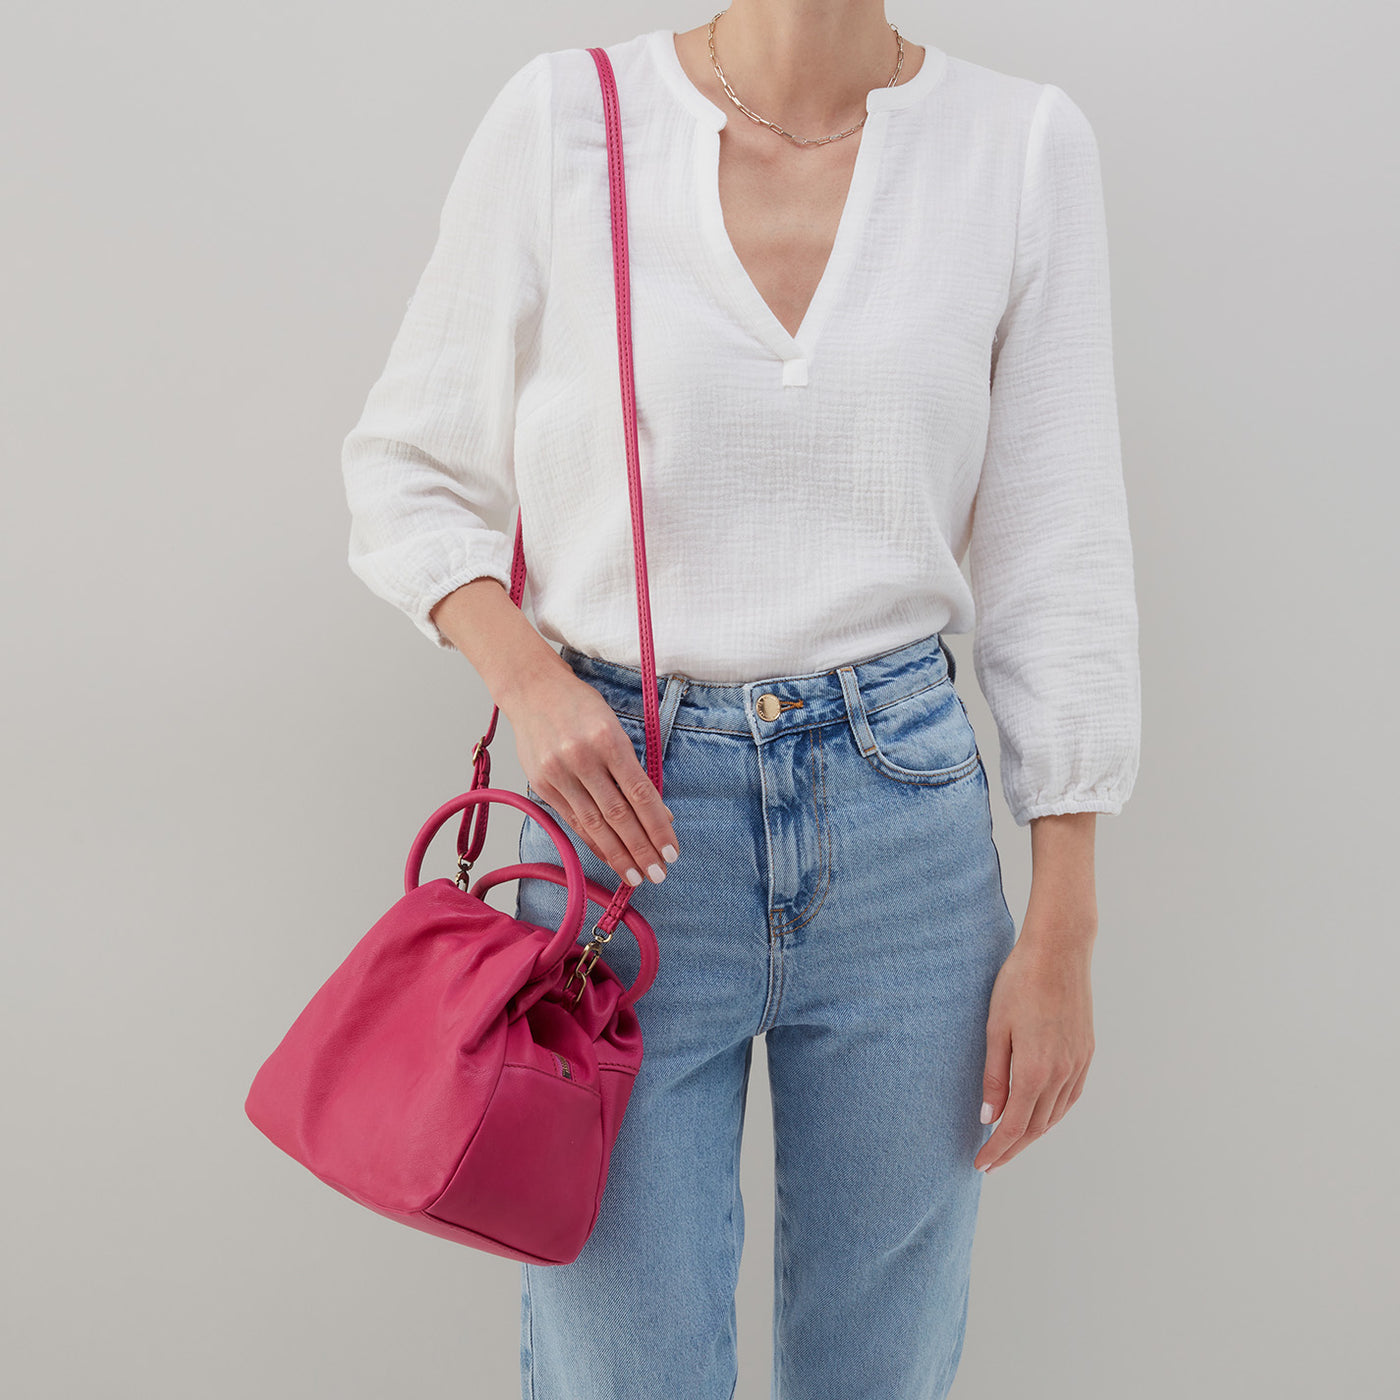 Darling Small Satchel in Soft Leather - Flamingo